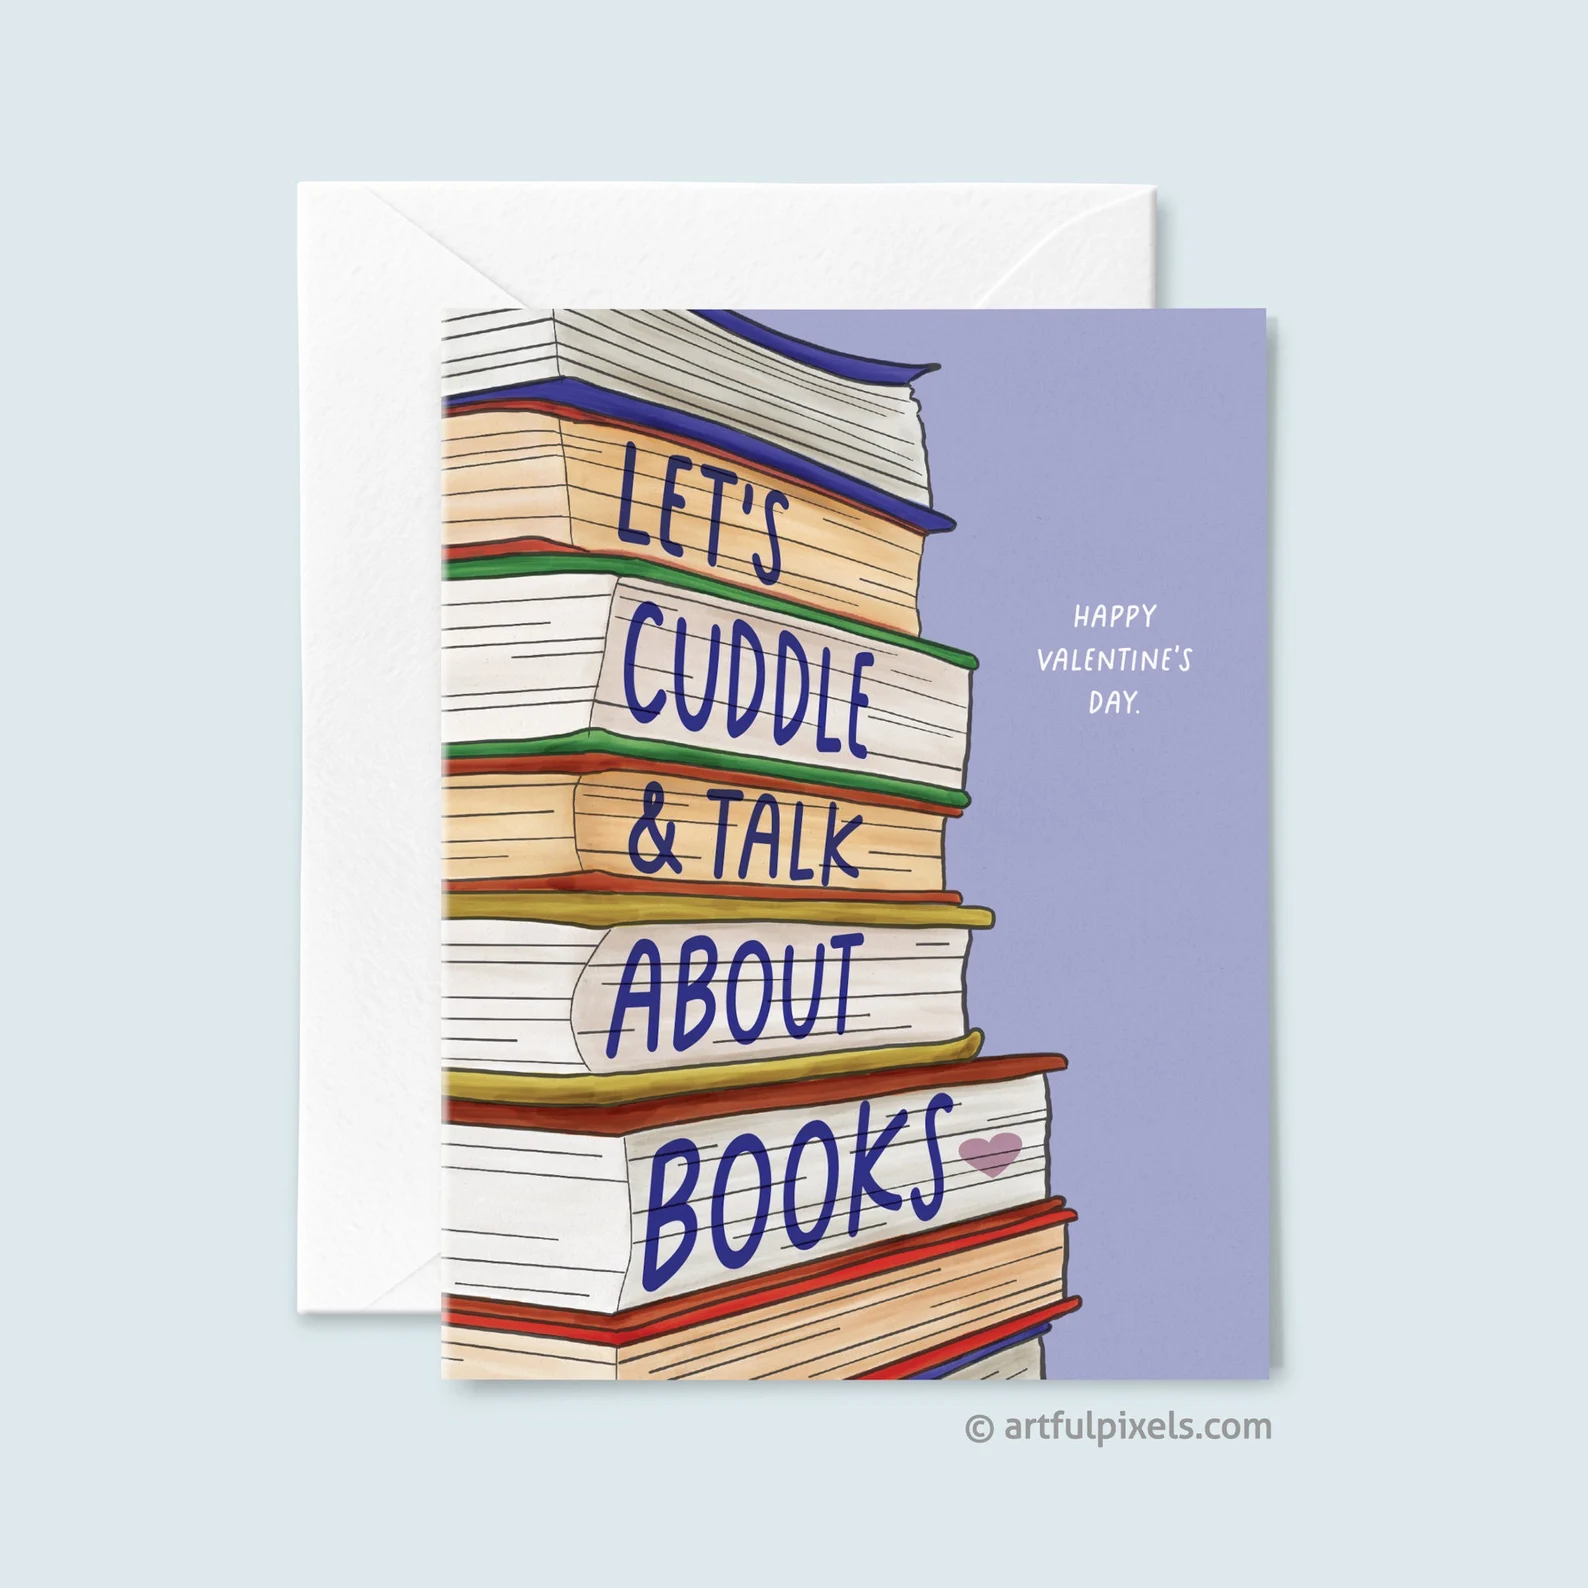 a stack of books on a card that reads "Let's cuddle and talk about books" and "Happy Valentine's Day"